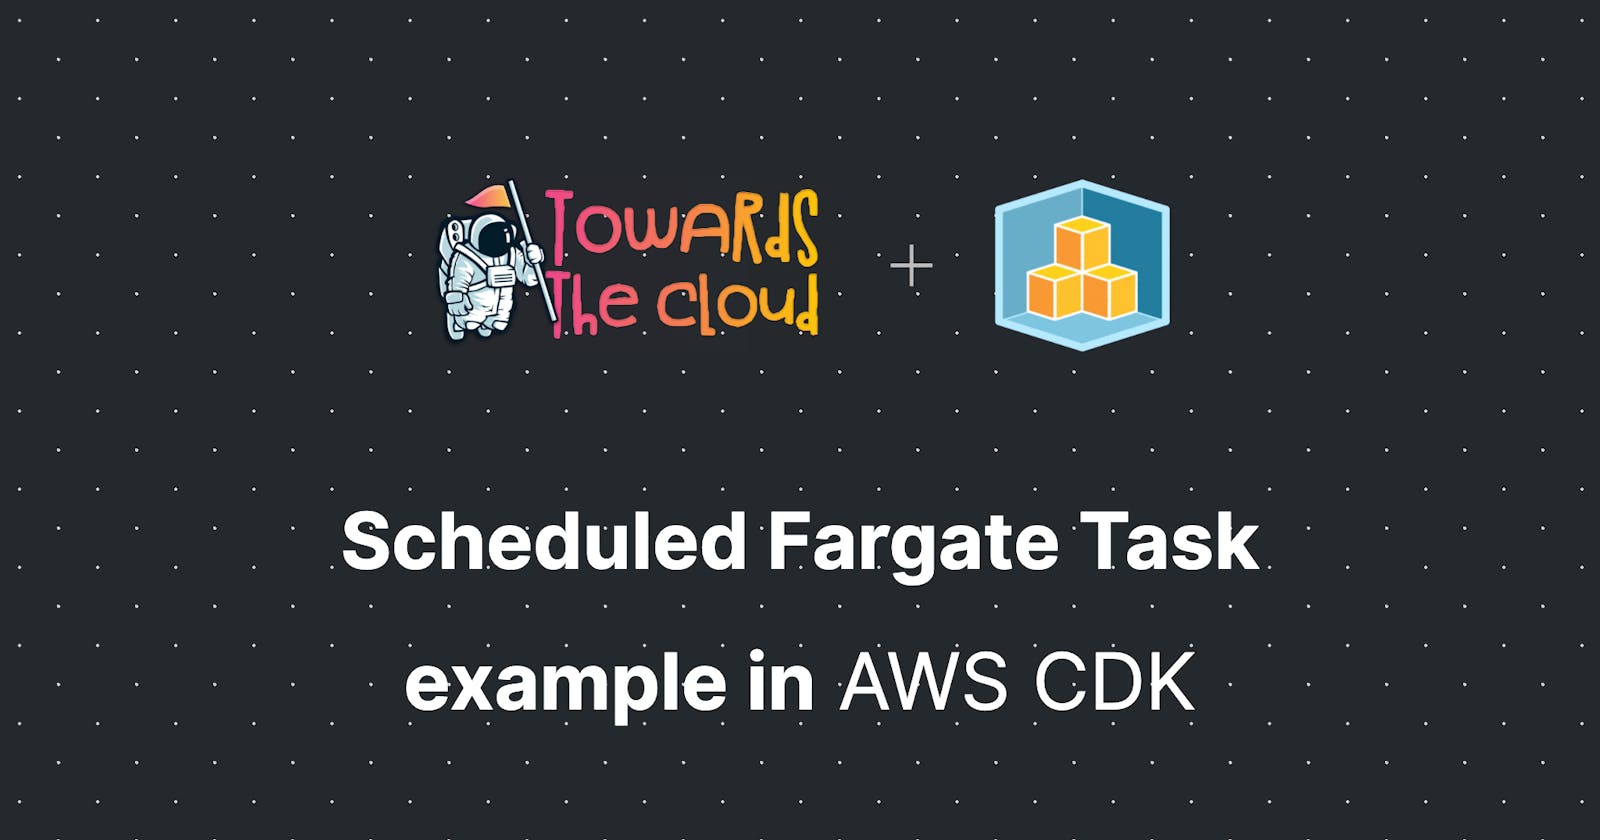 Scheduled Fargate Task example in AWS CDK